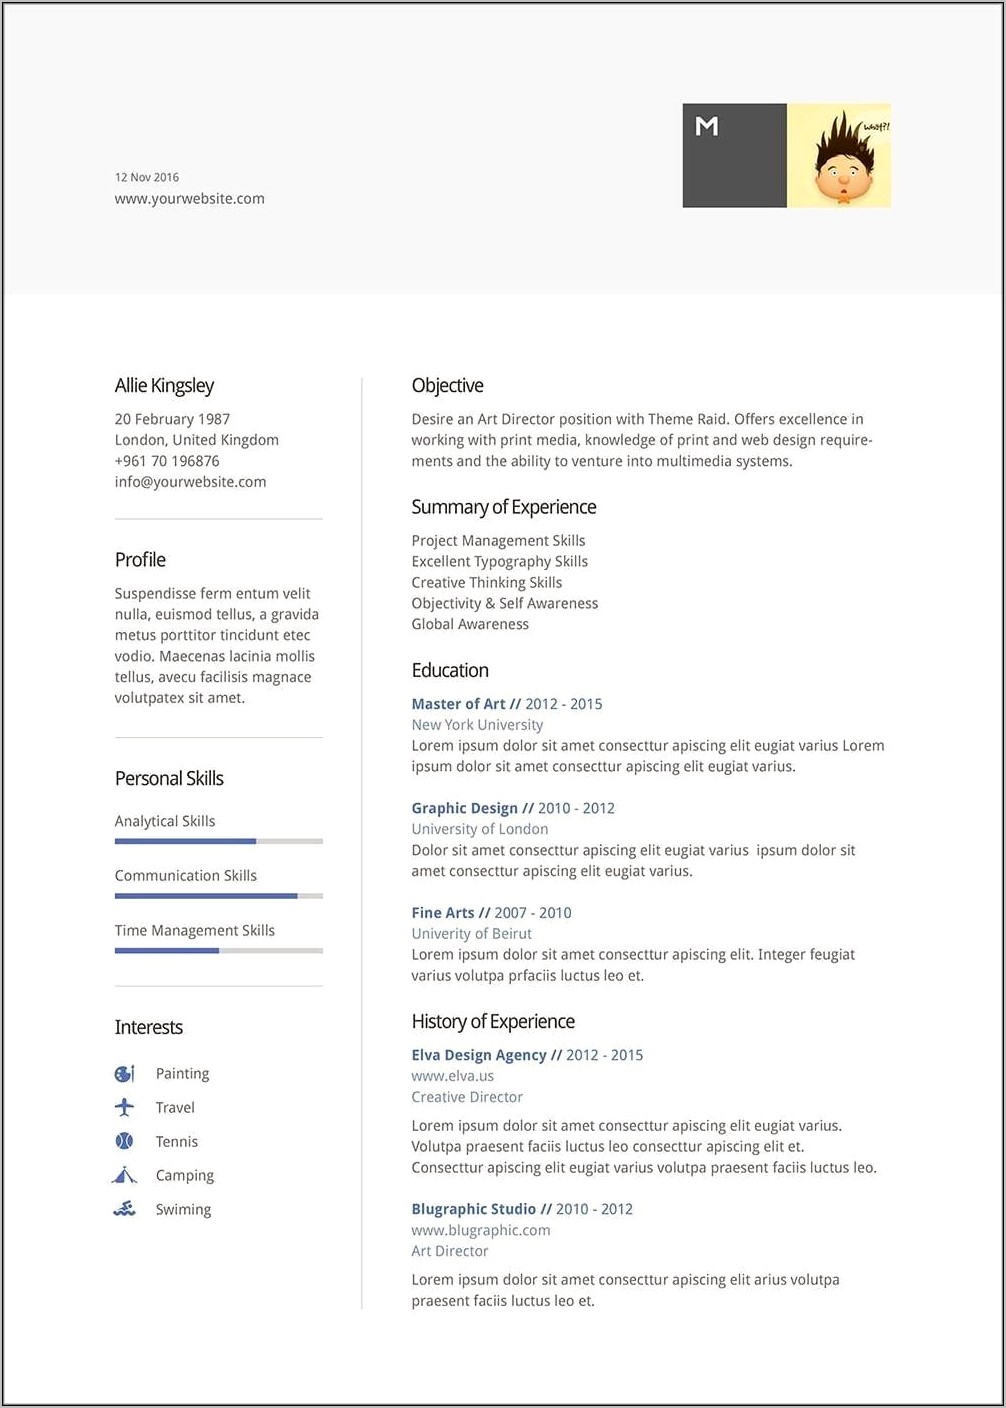 Microsoft Word 2016 Resume Templates With Photo